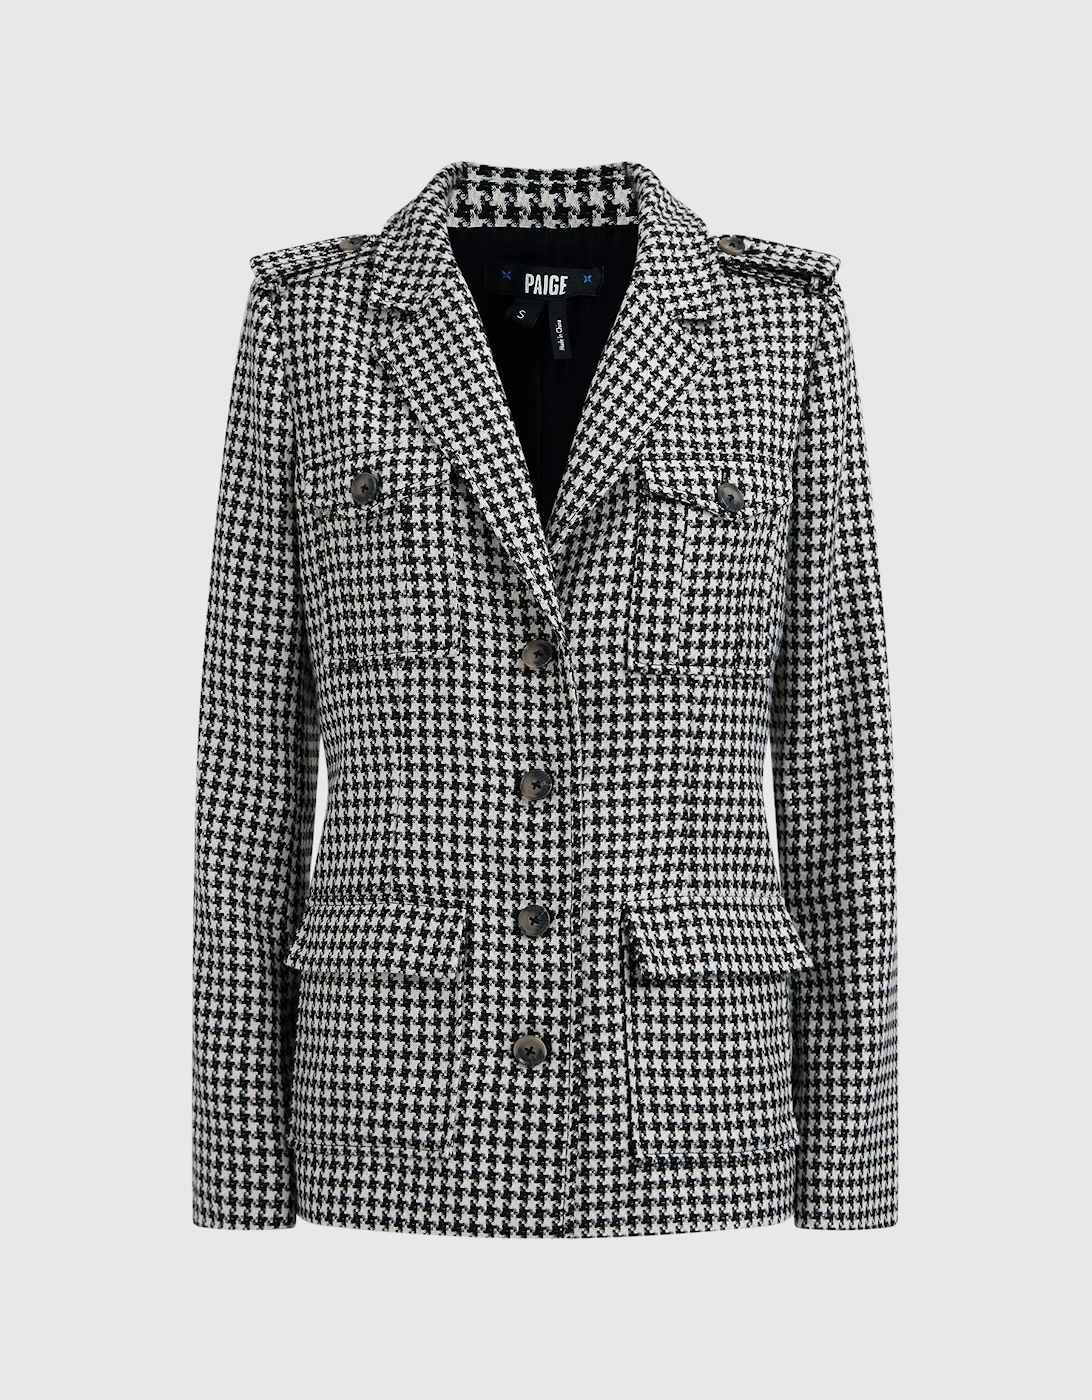 Paige Dogtooth Single Breasted Jacket, 2 of 1